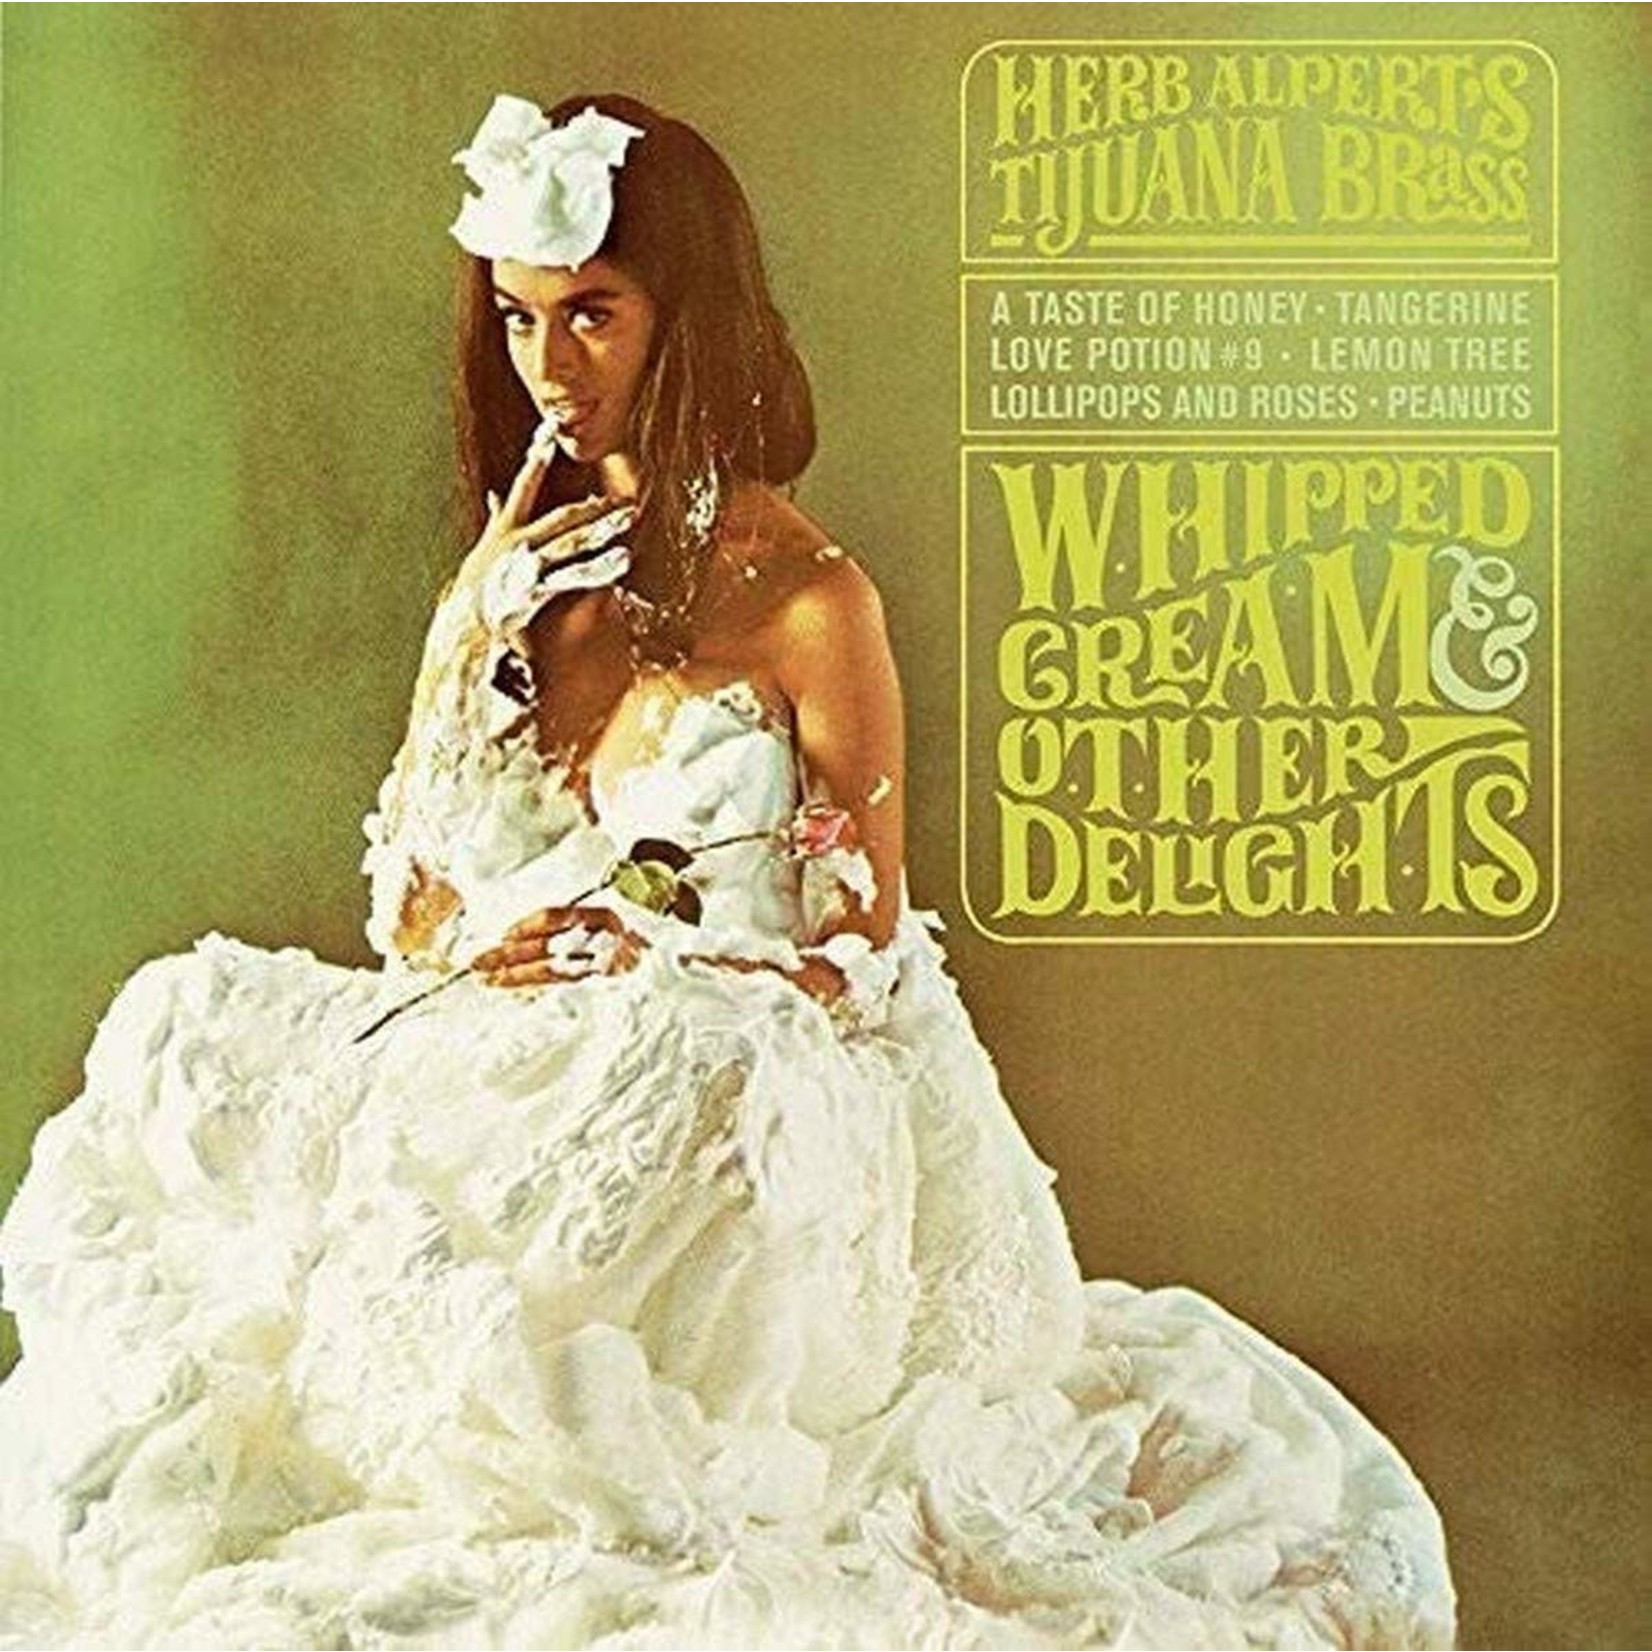 [Vintage] Herb Alpert - Whipped Cream & Other Delights